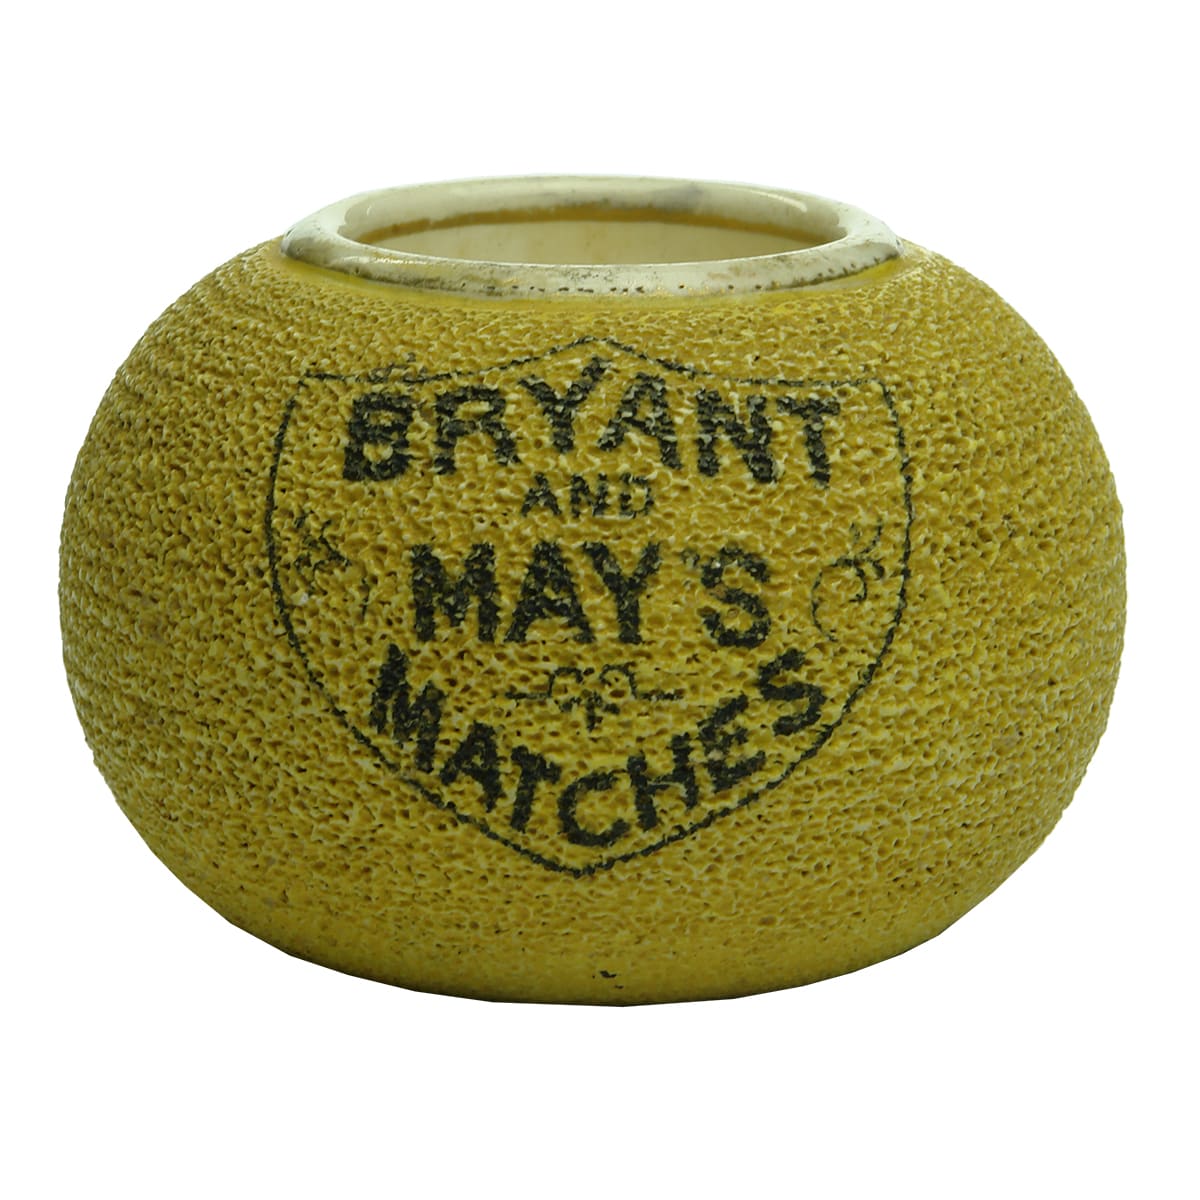 Advertising Match Striker. Bryant and May's Matches.